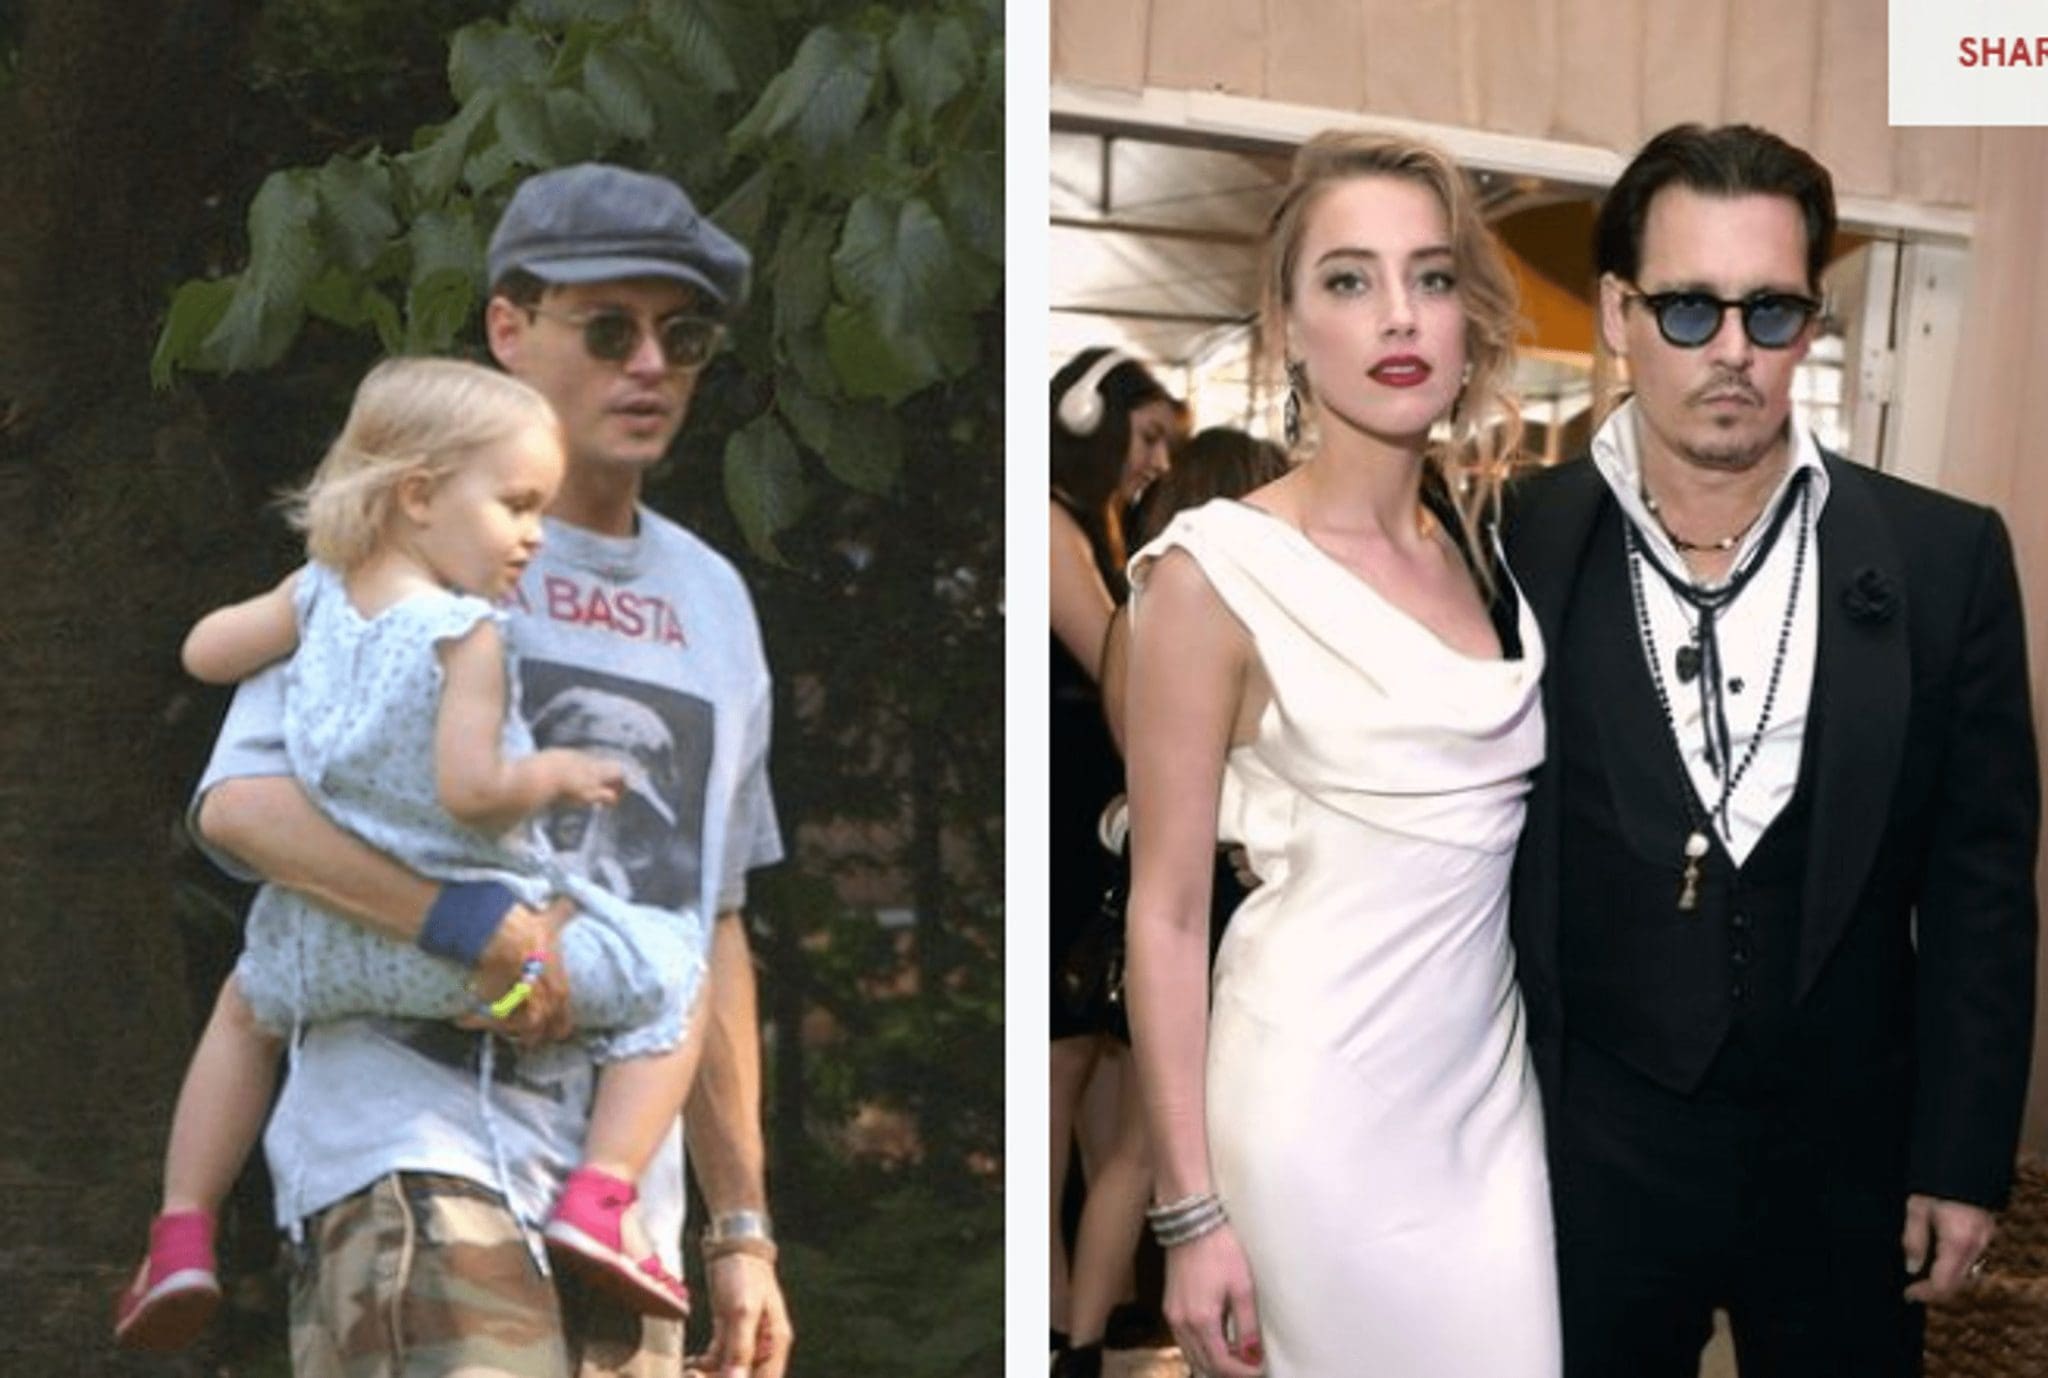 While Johnny Depp is waiting for the verdict of the court, his daughter Lily-Rose celebrates her 23rd birthday